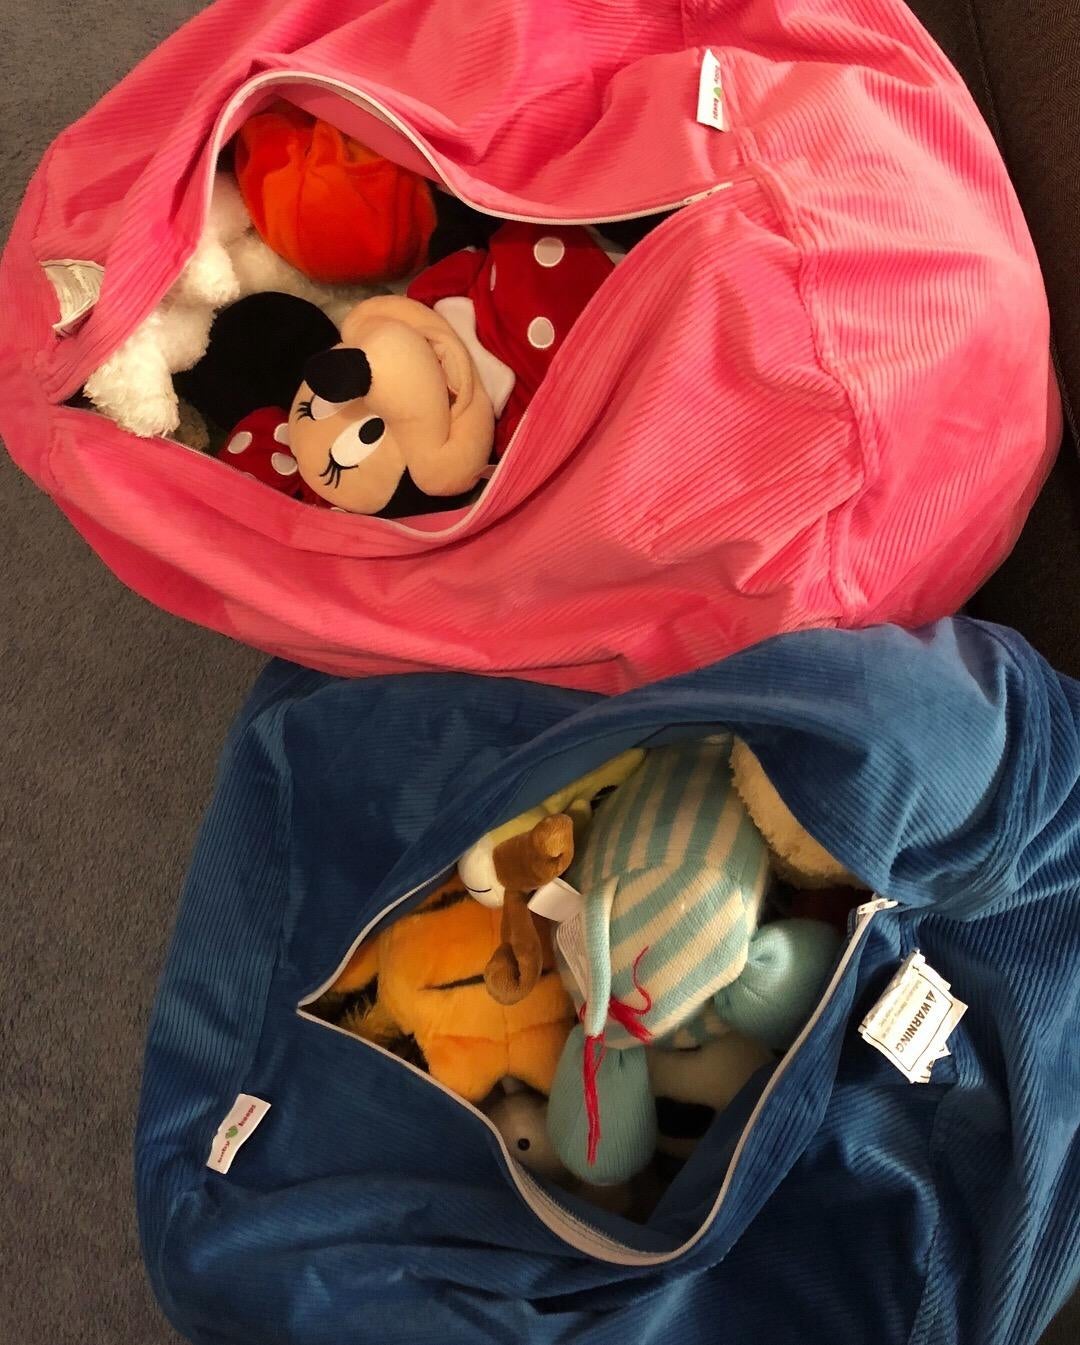 Reviewer's two bean bags on the floor opened with toys in them